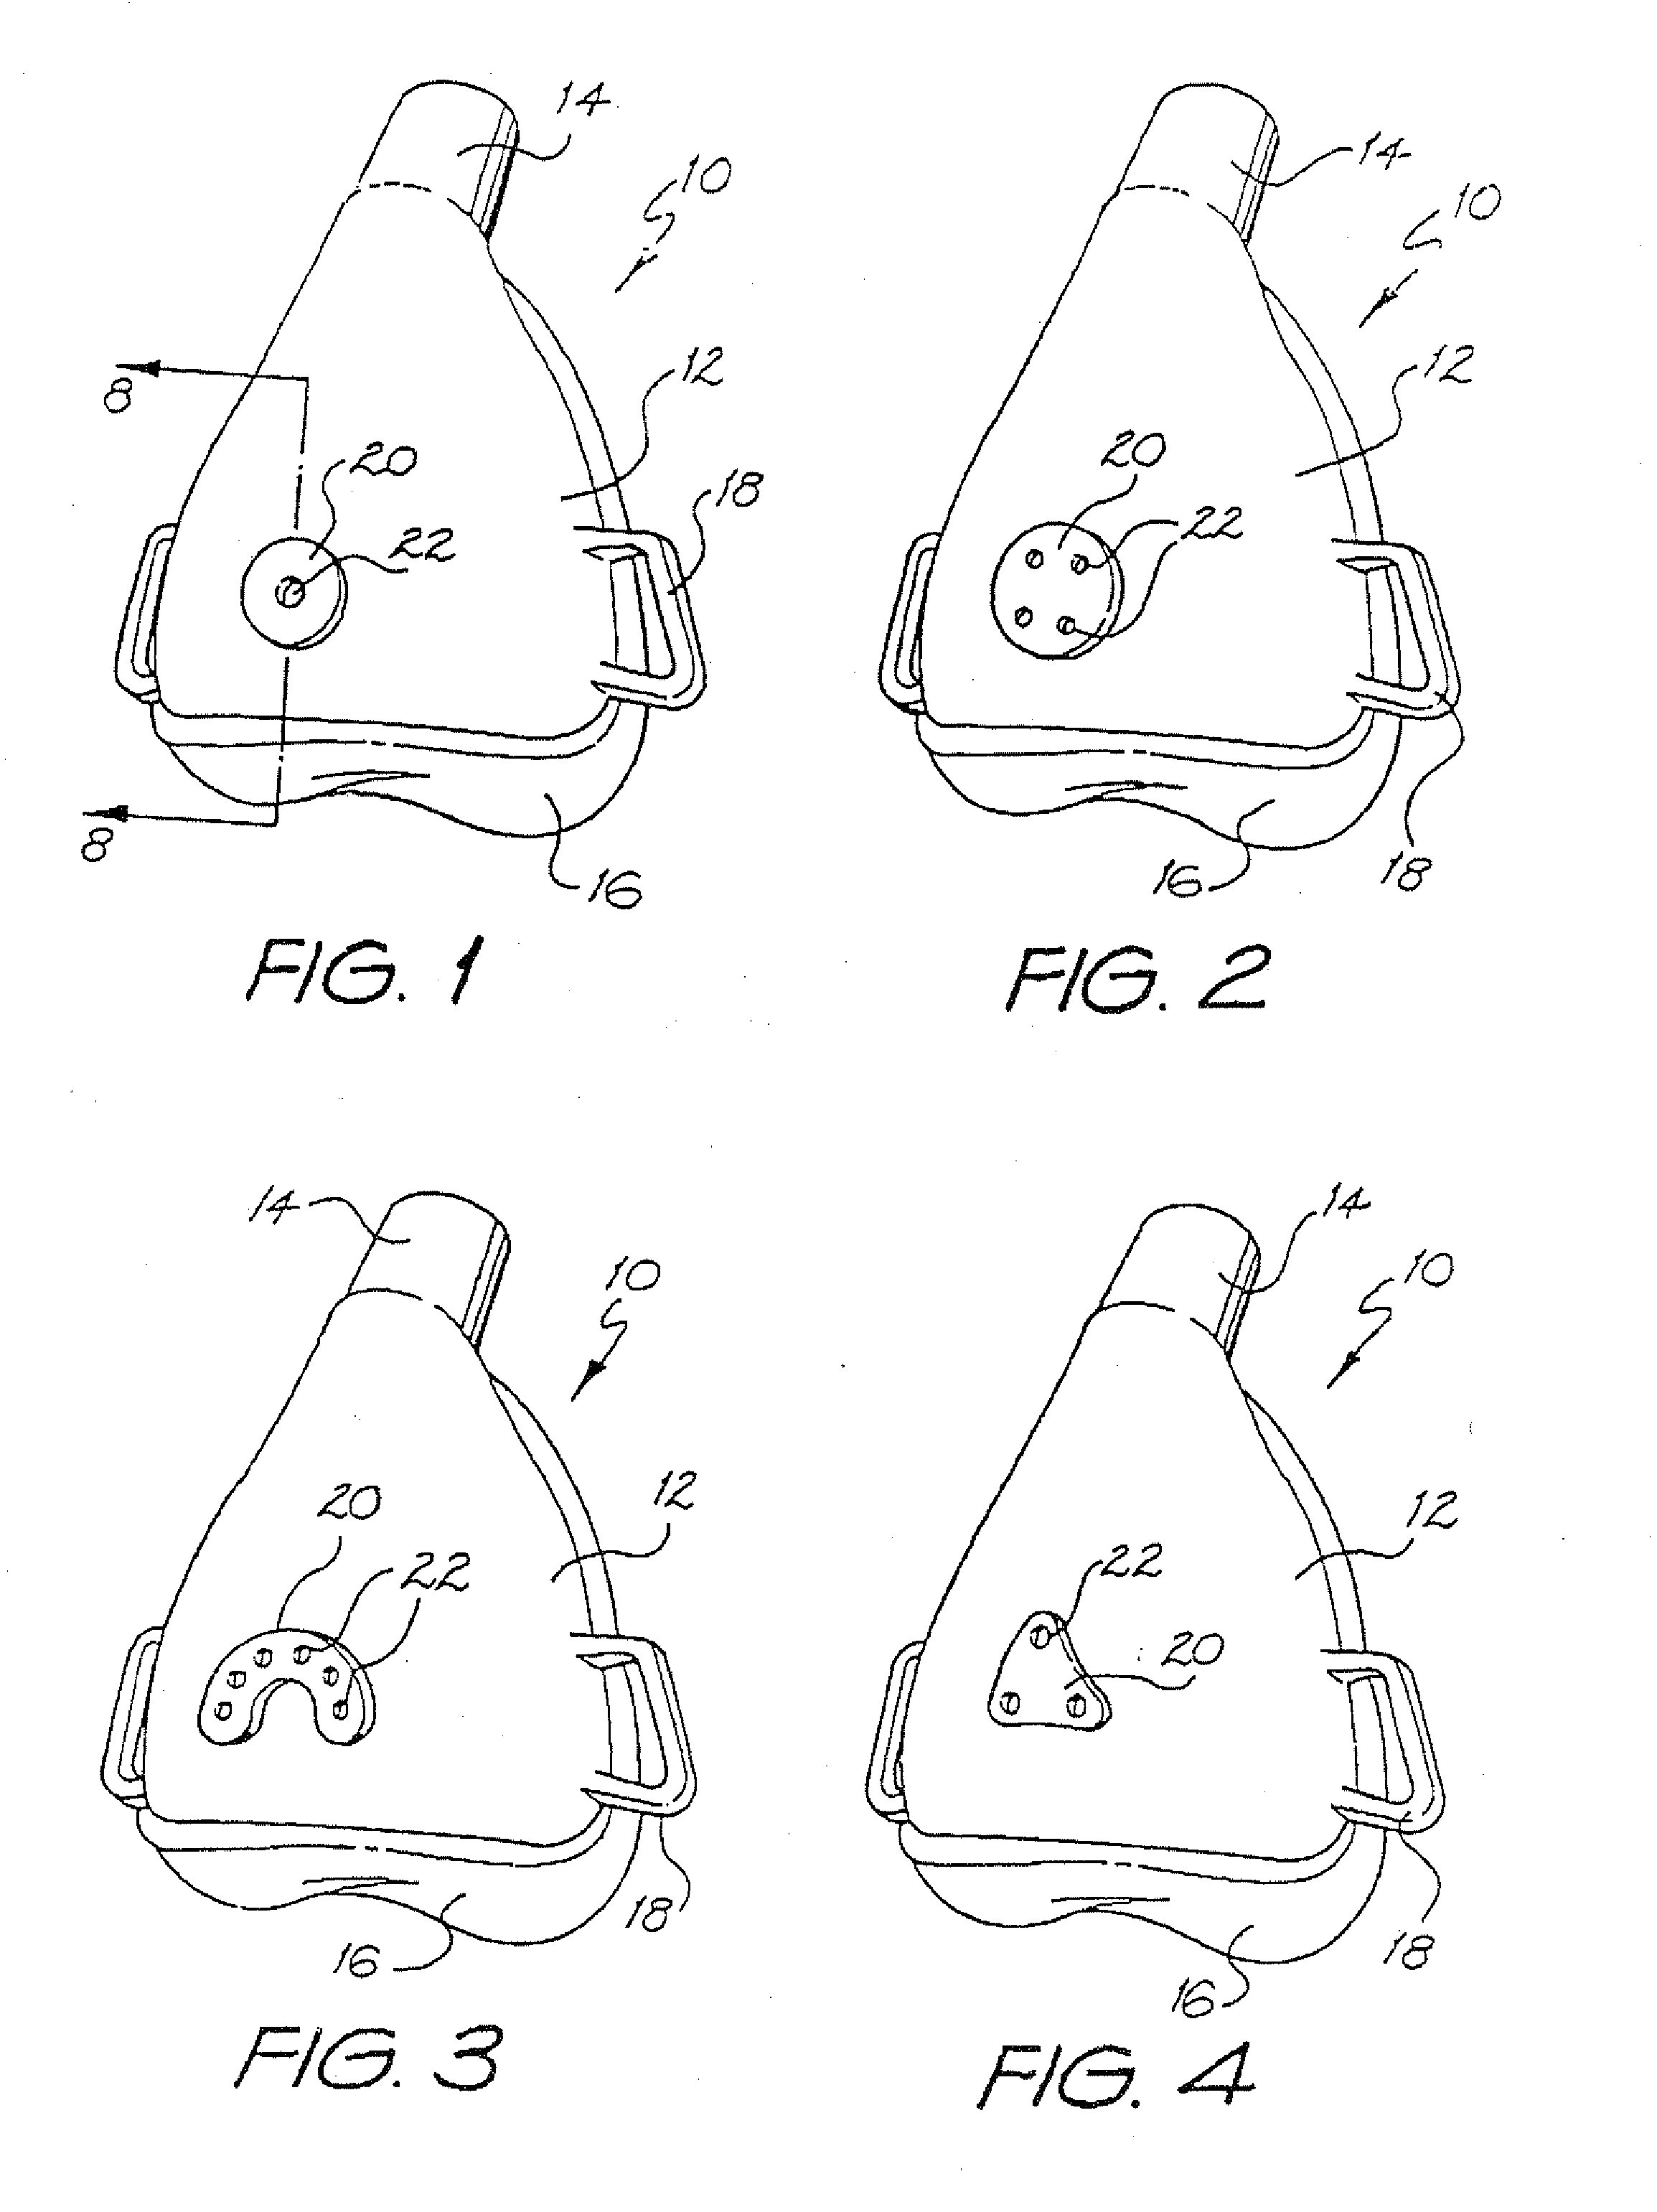 Mask and vent assembly therefor